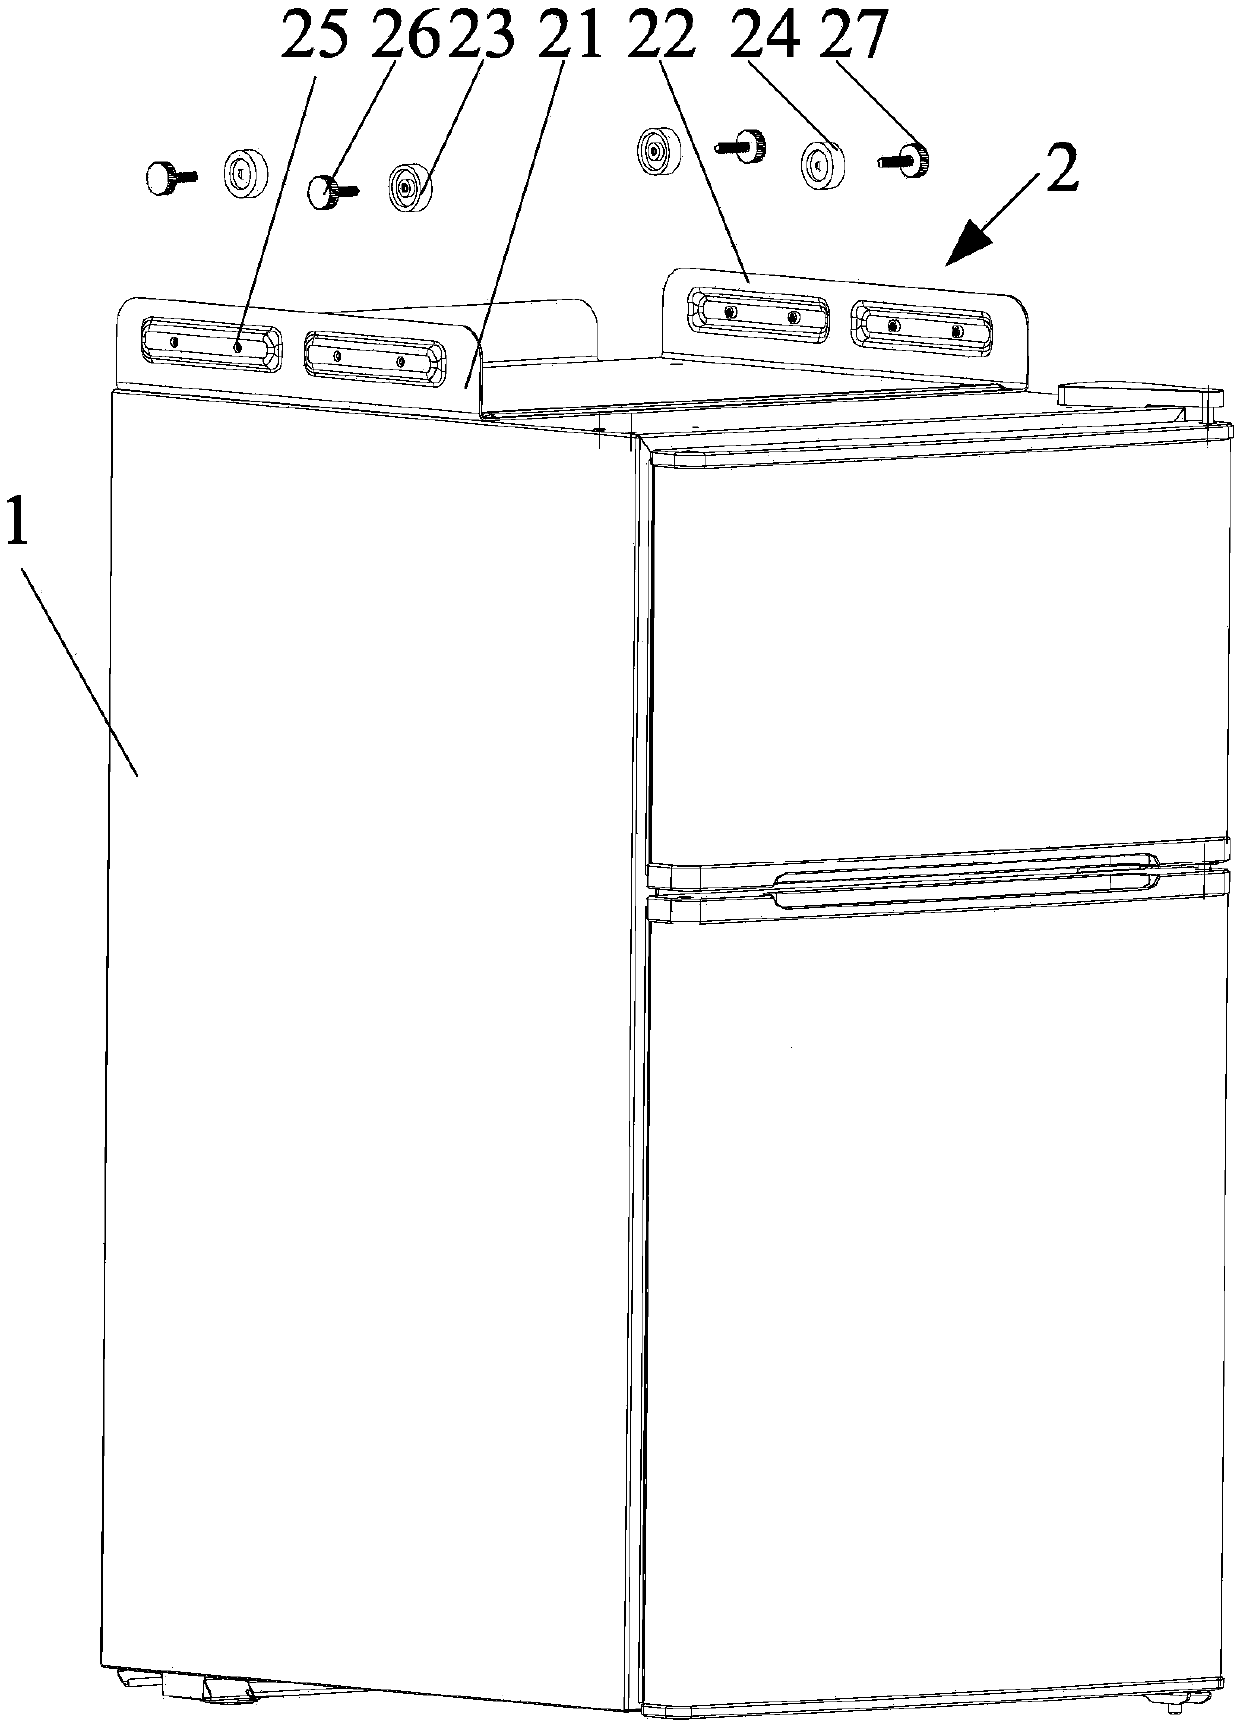 Refrigerator structure and appliance combination